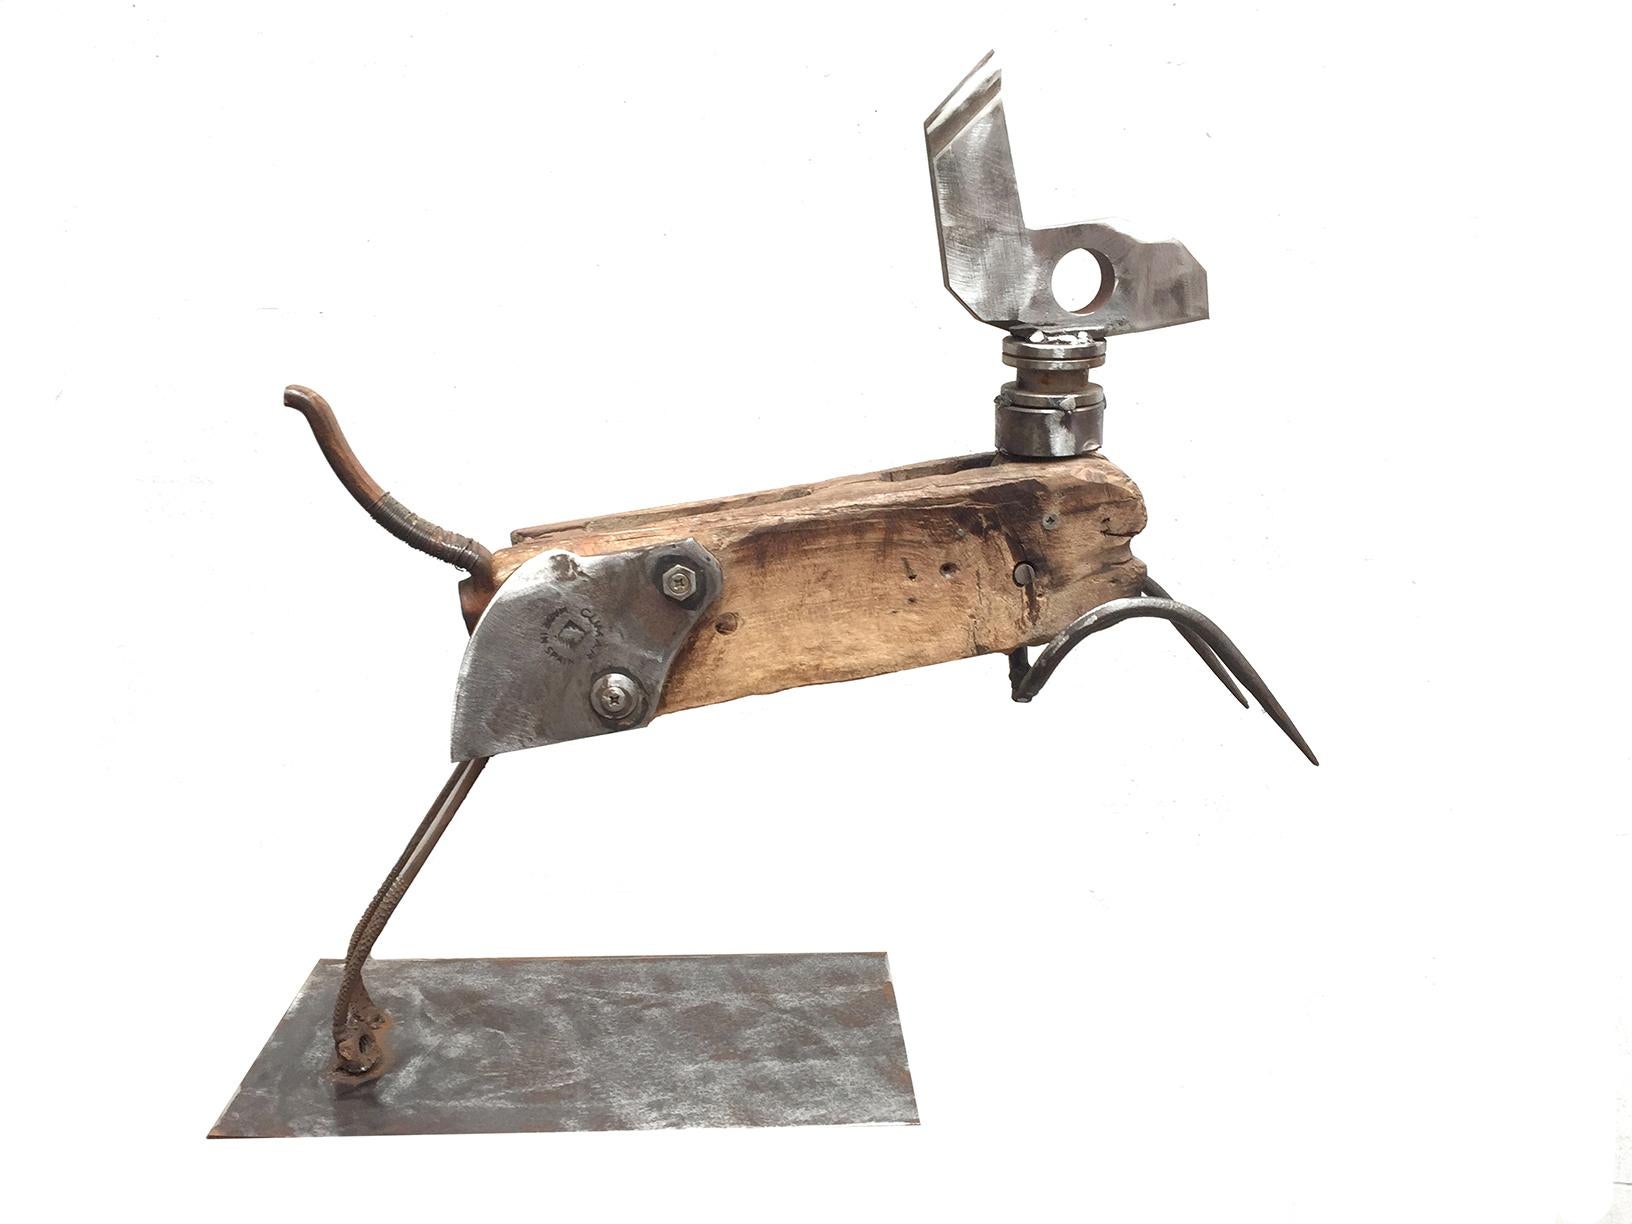 Liebre - 21st Century, Contemporary Sculpture, Figurative, Recycled Objects